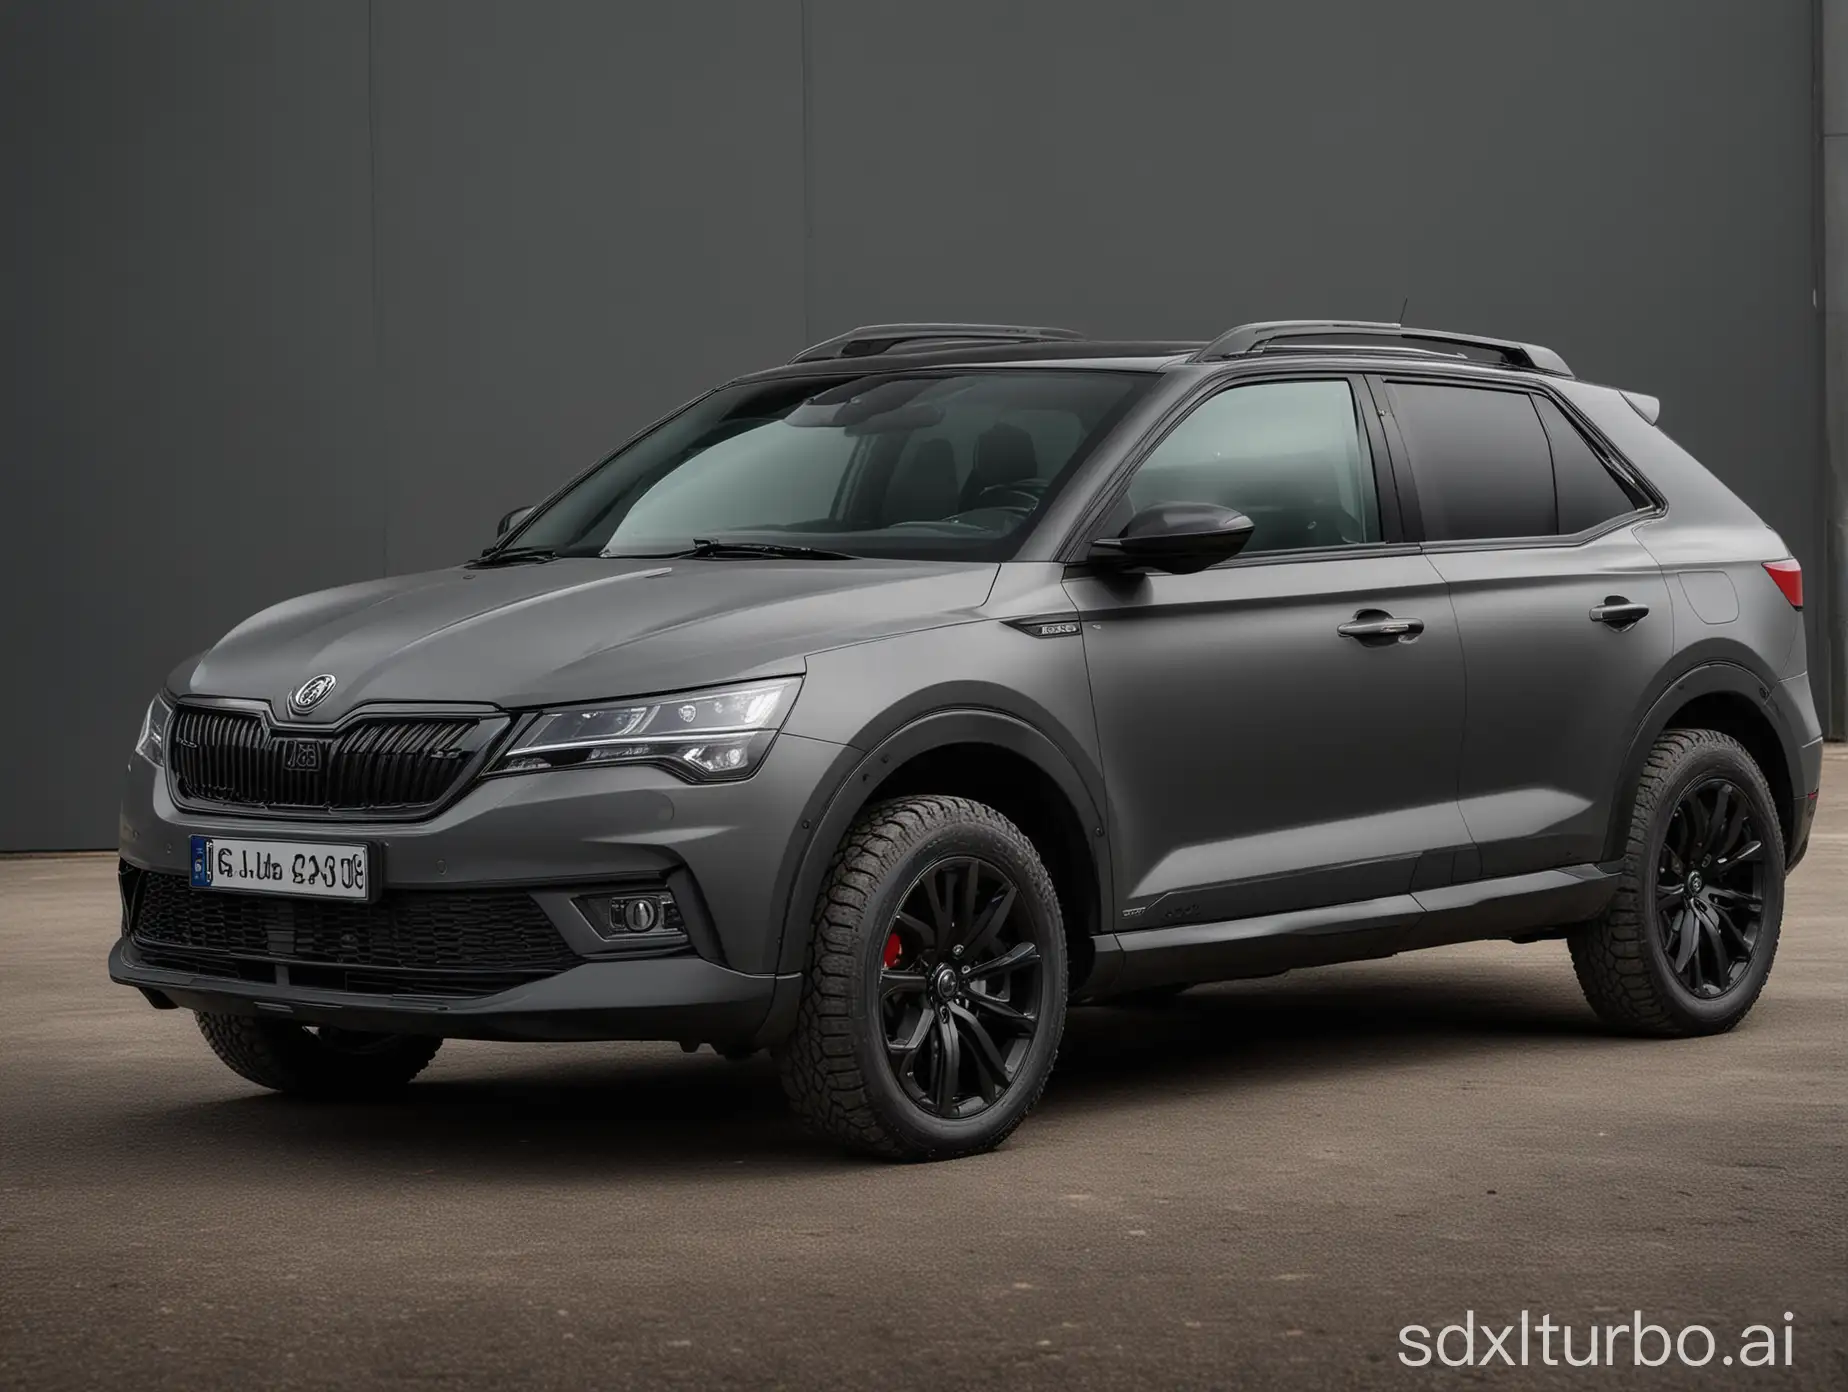 professional portrait shot of Skoda Camiq, model 2019. Dark matte Ash grey paint. Equipped with Off-road front bumper. off-road wheels, off-road roof racks, off-road running board